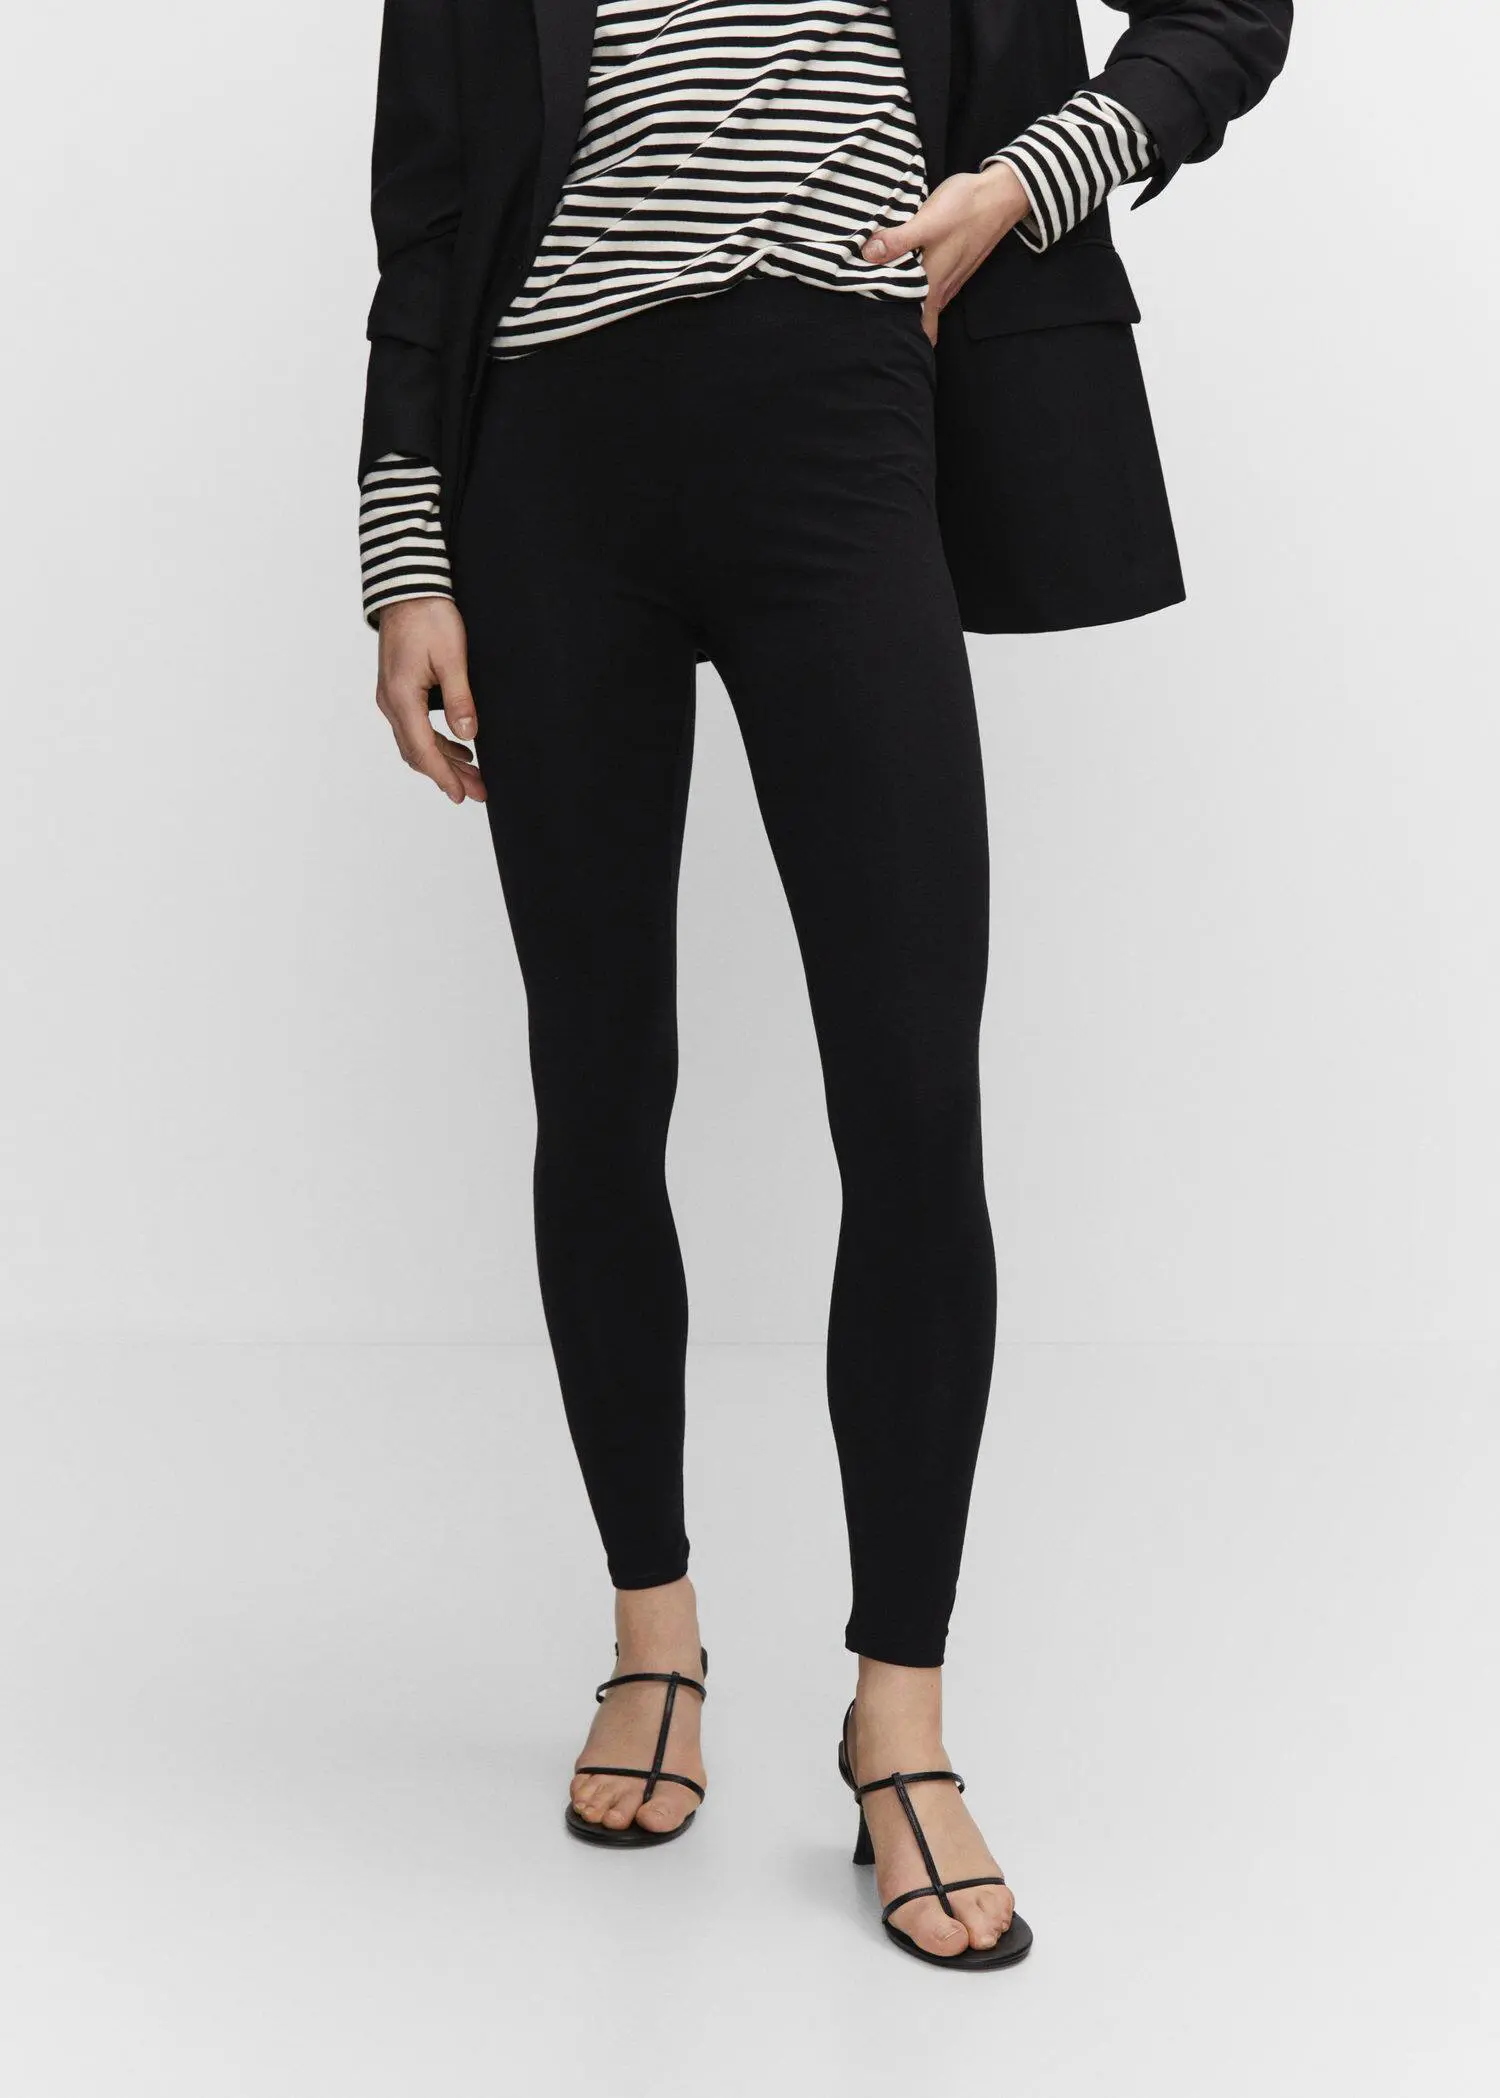 Mango High waist cotton leggings. a woman in black pants and a jacket. 